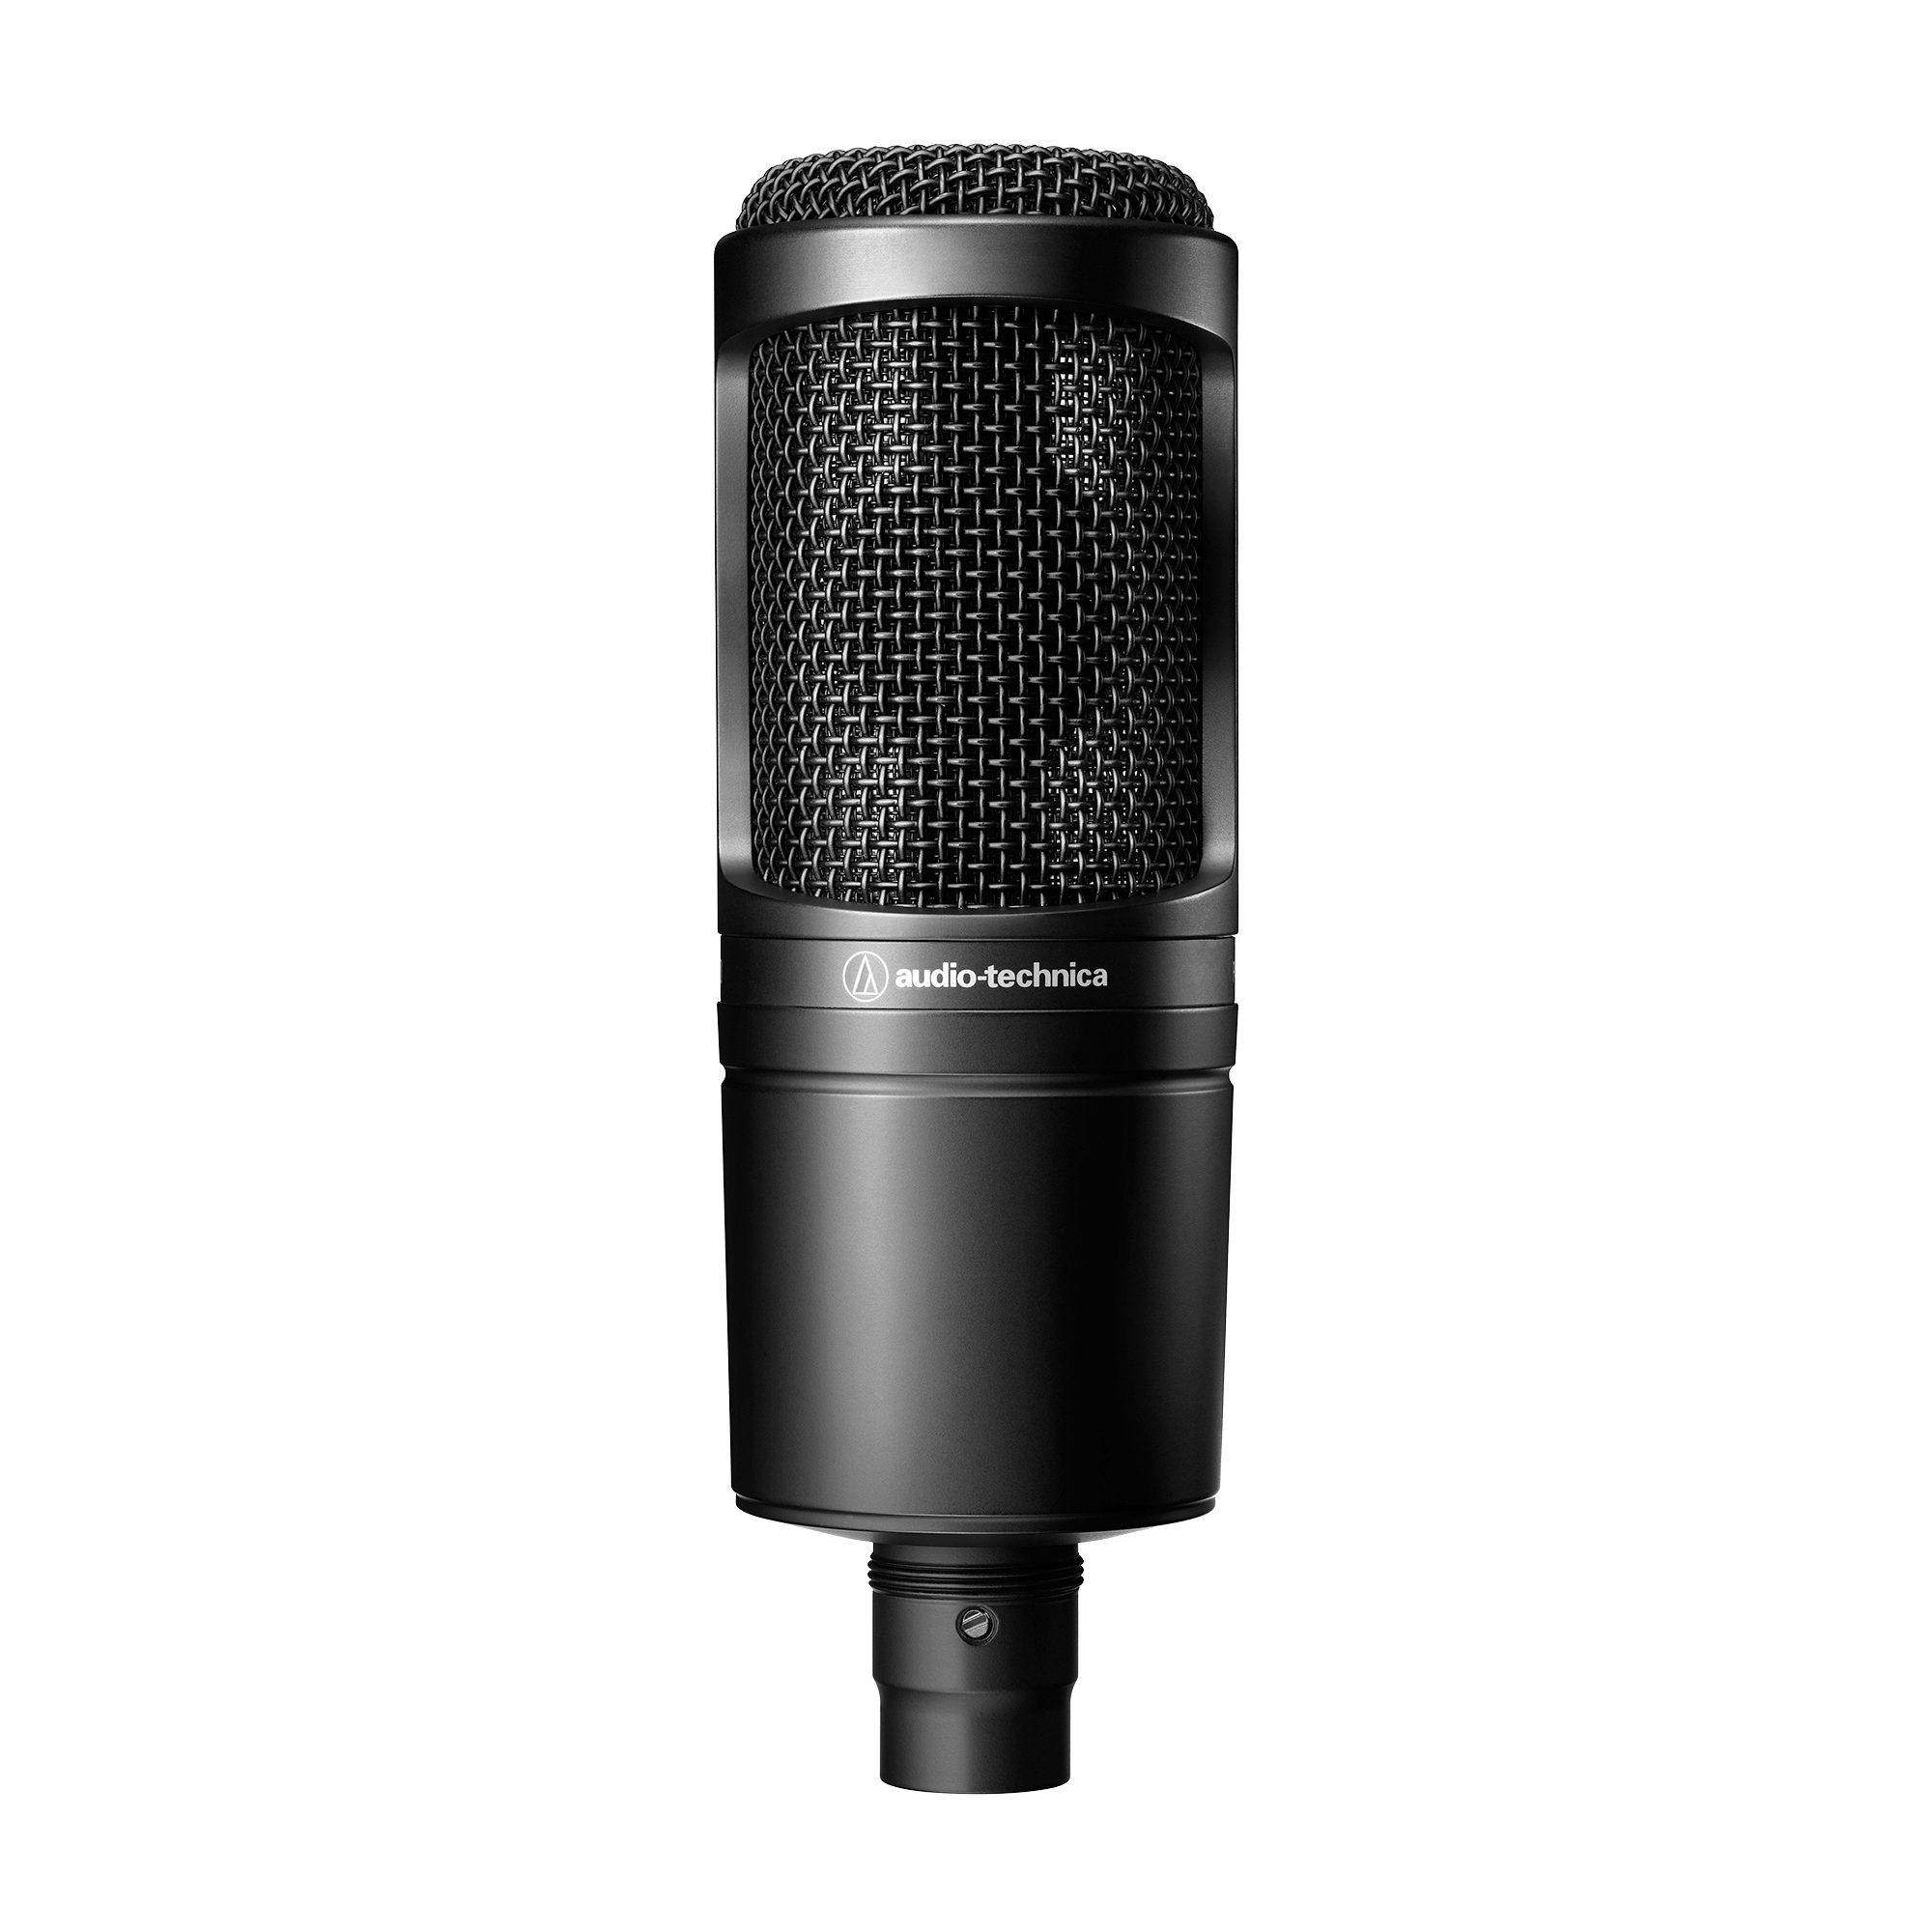 NWT Audio-Technica AT2020 Cardioid Condenser Microphone